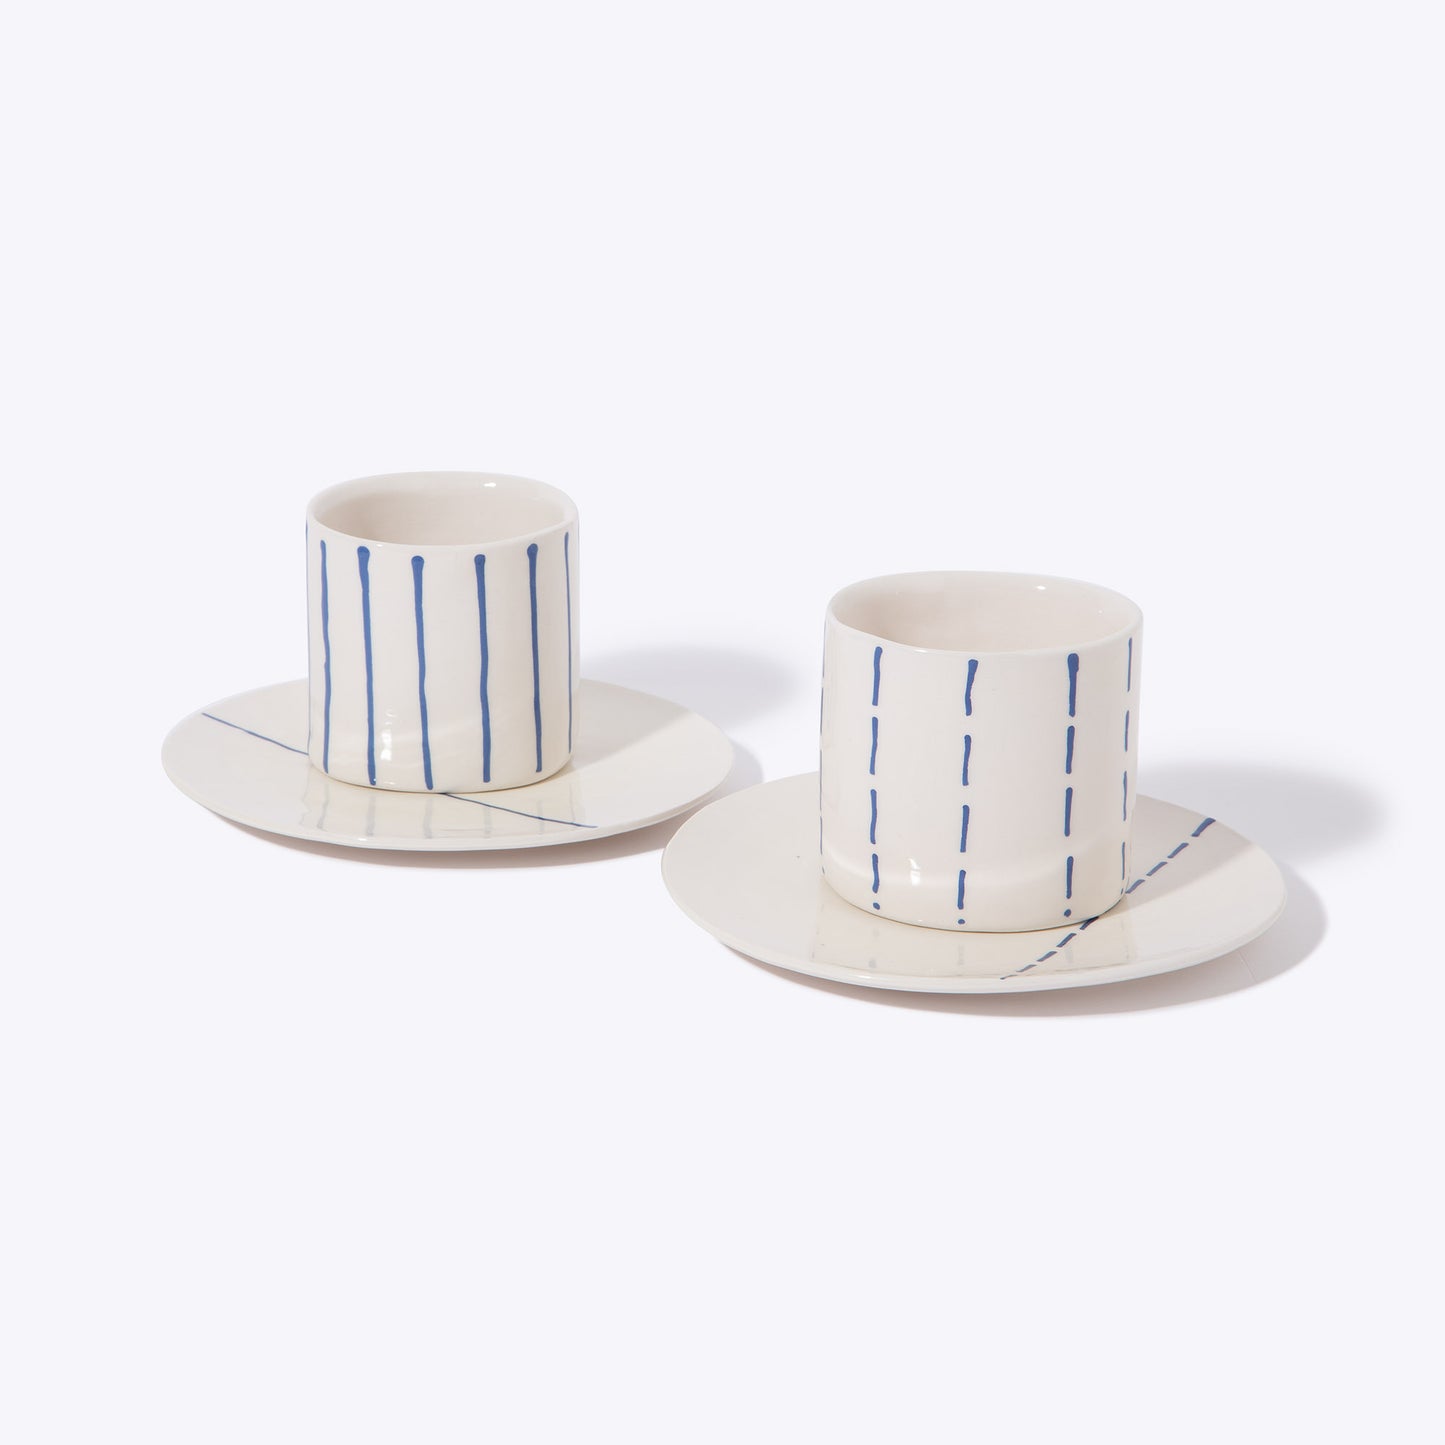 Ettory ~ Cup set of 2